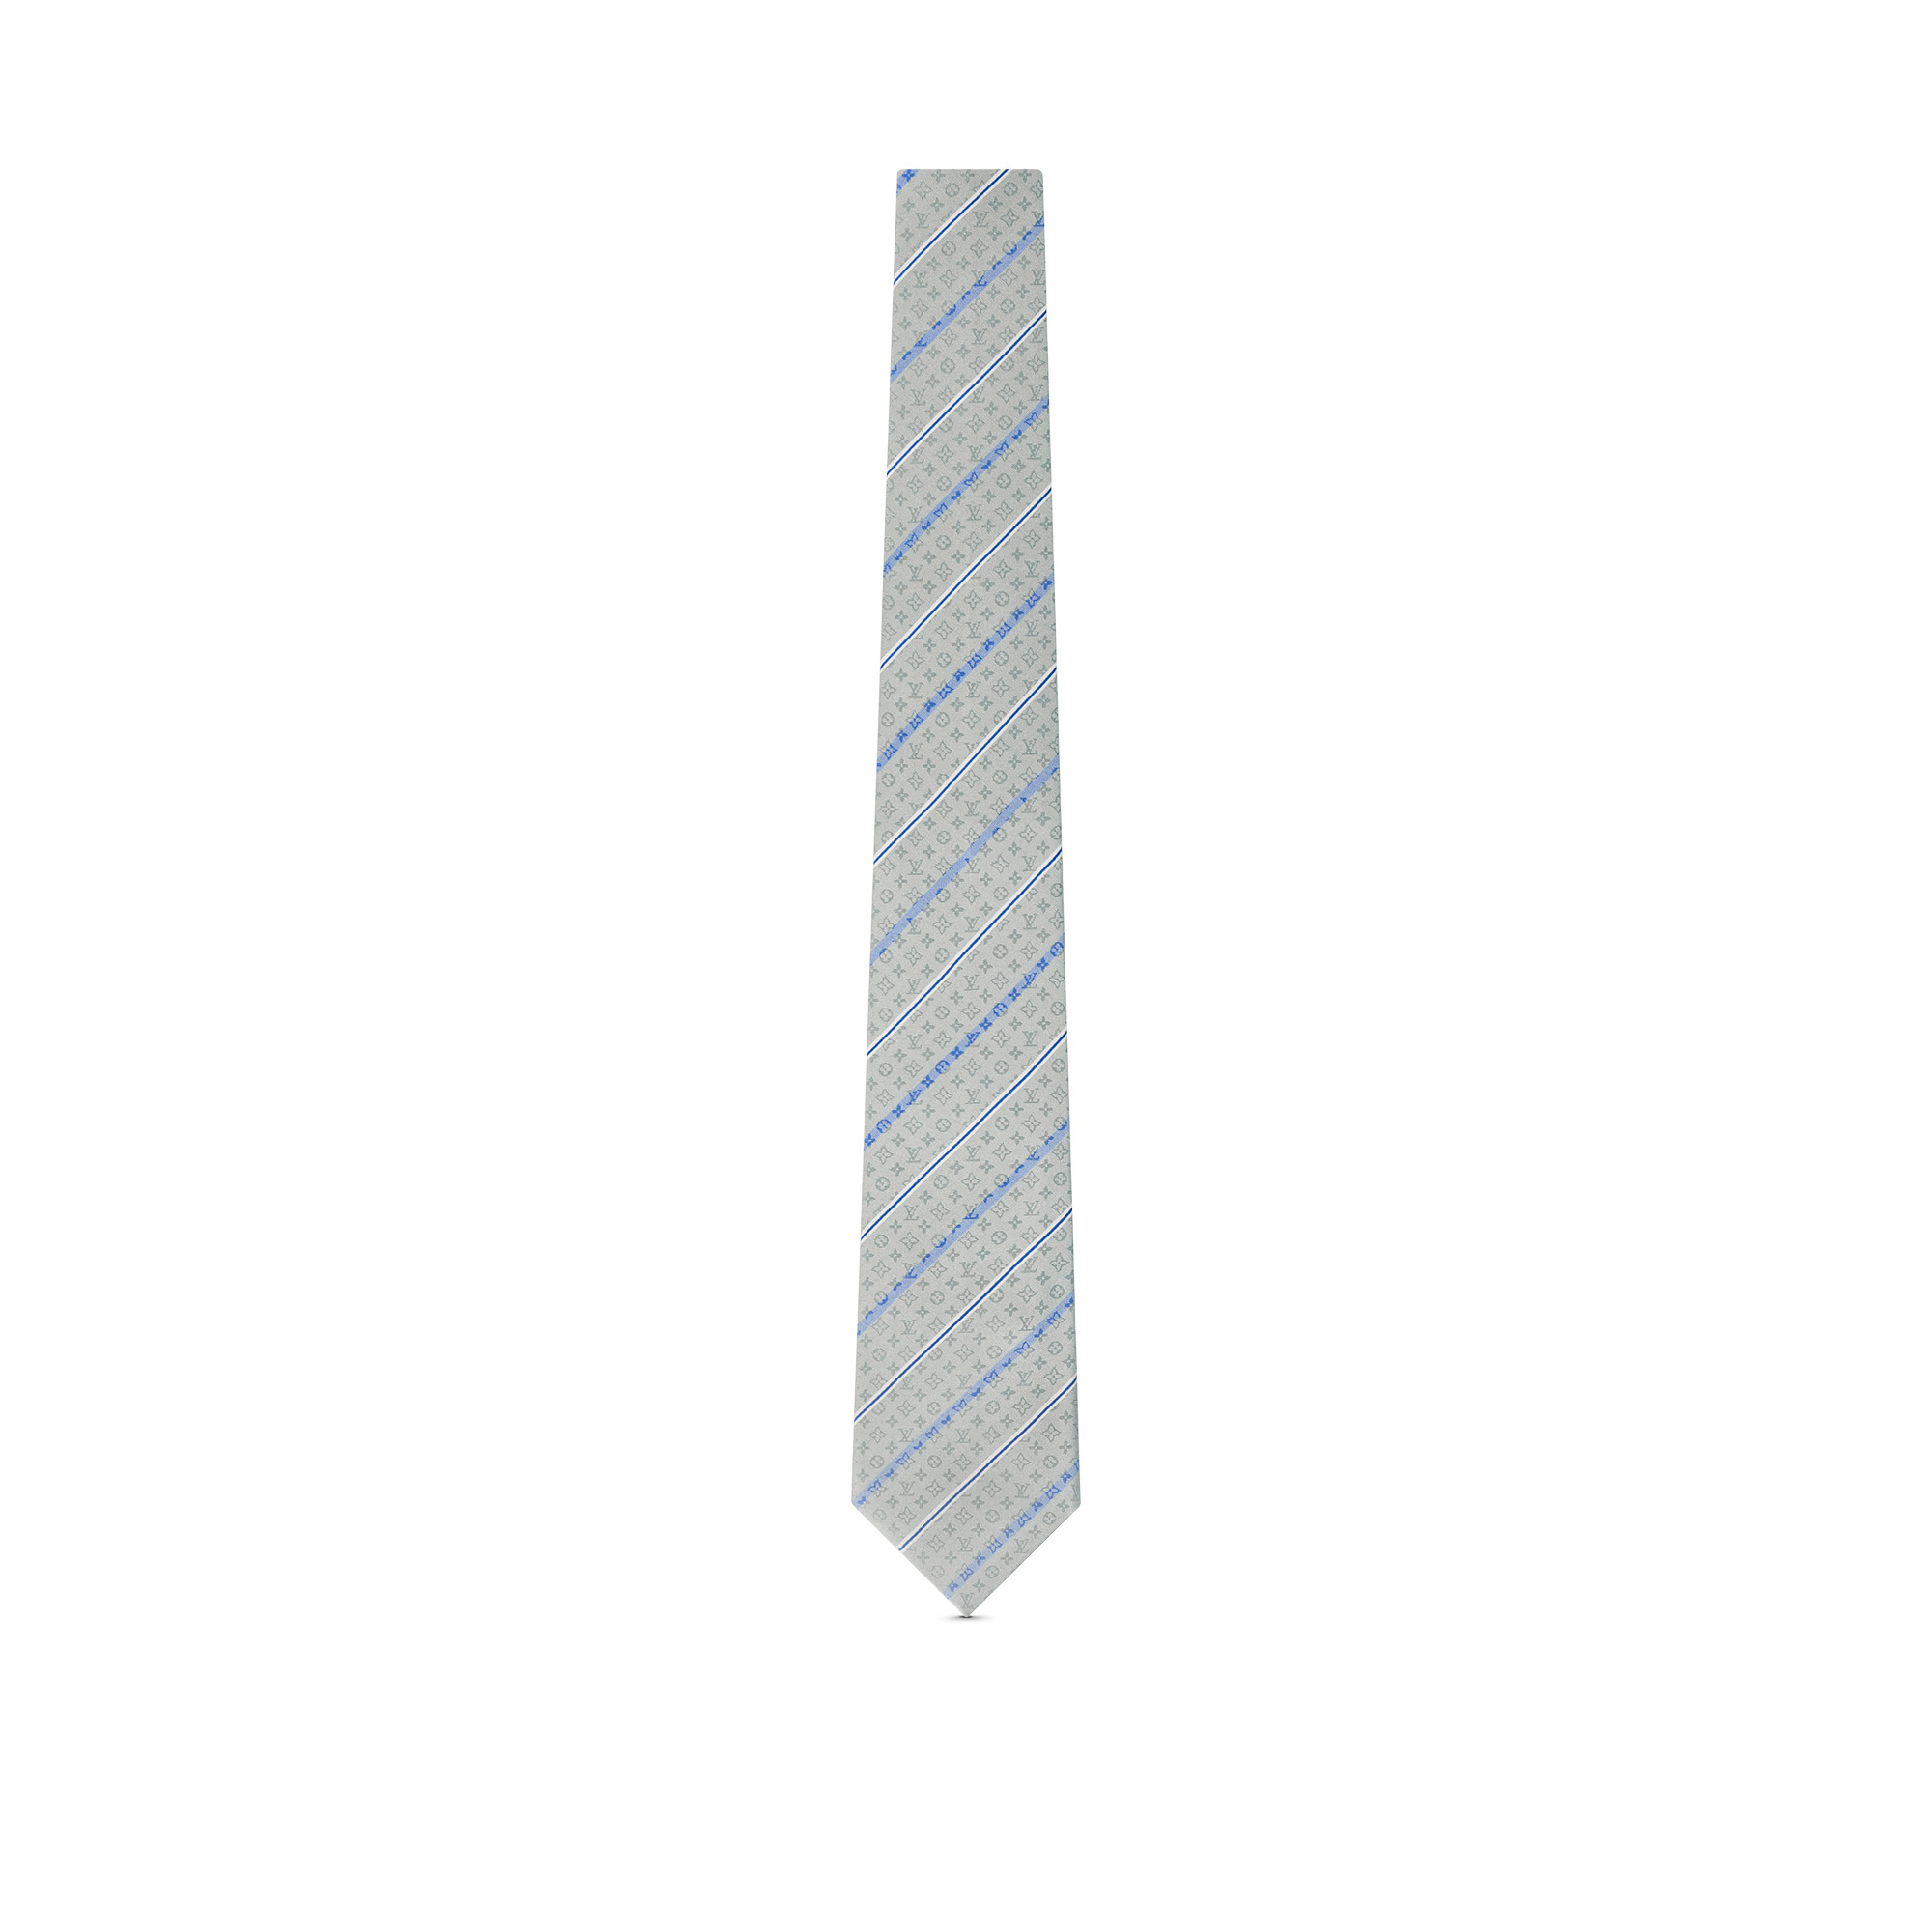 Lined Stripes Tie - 1